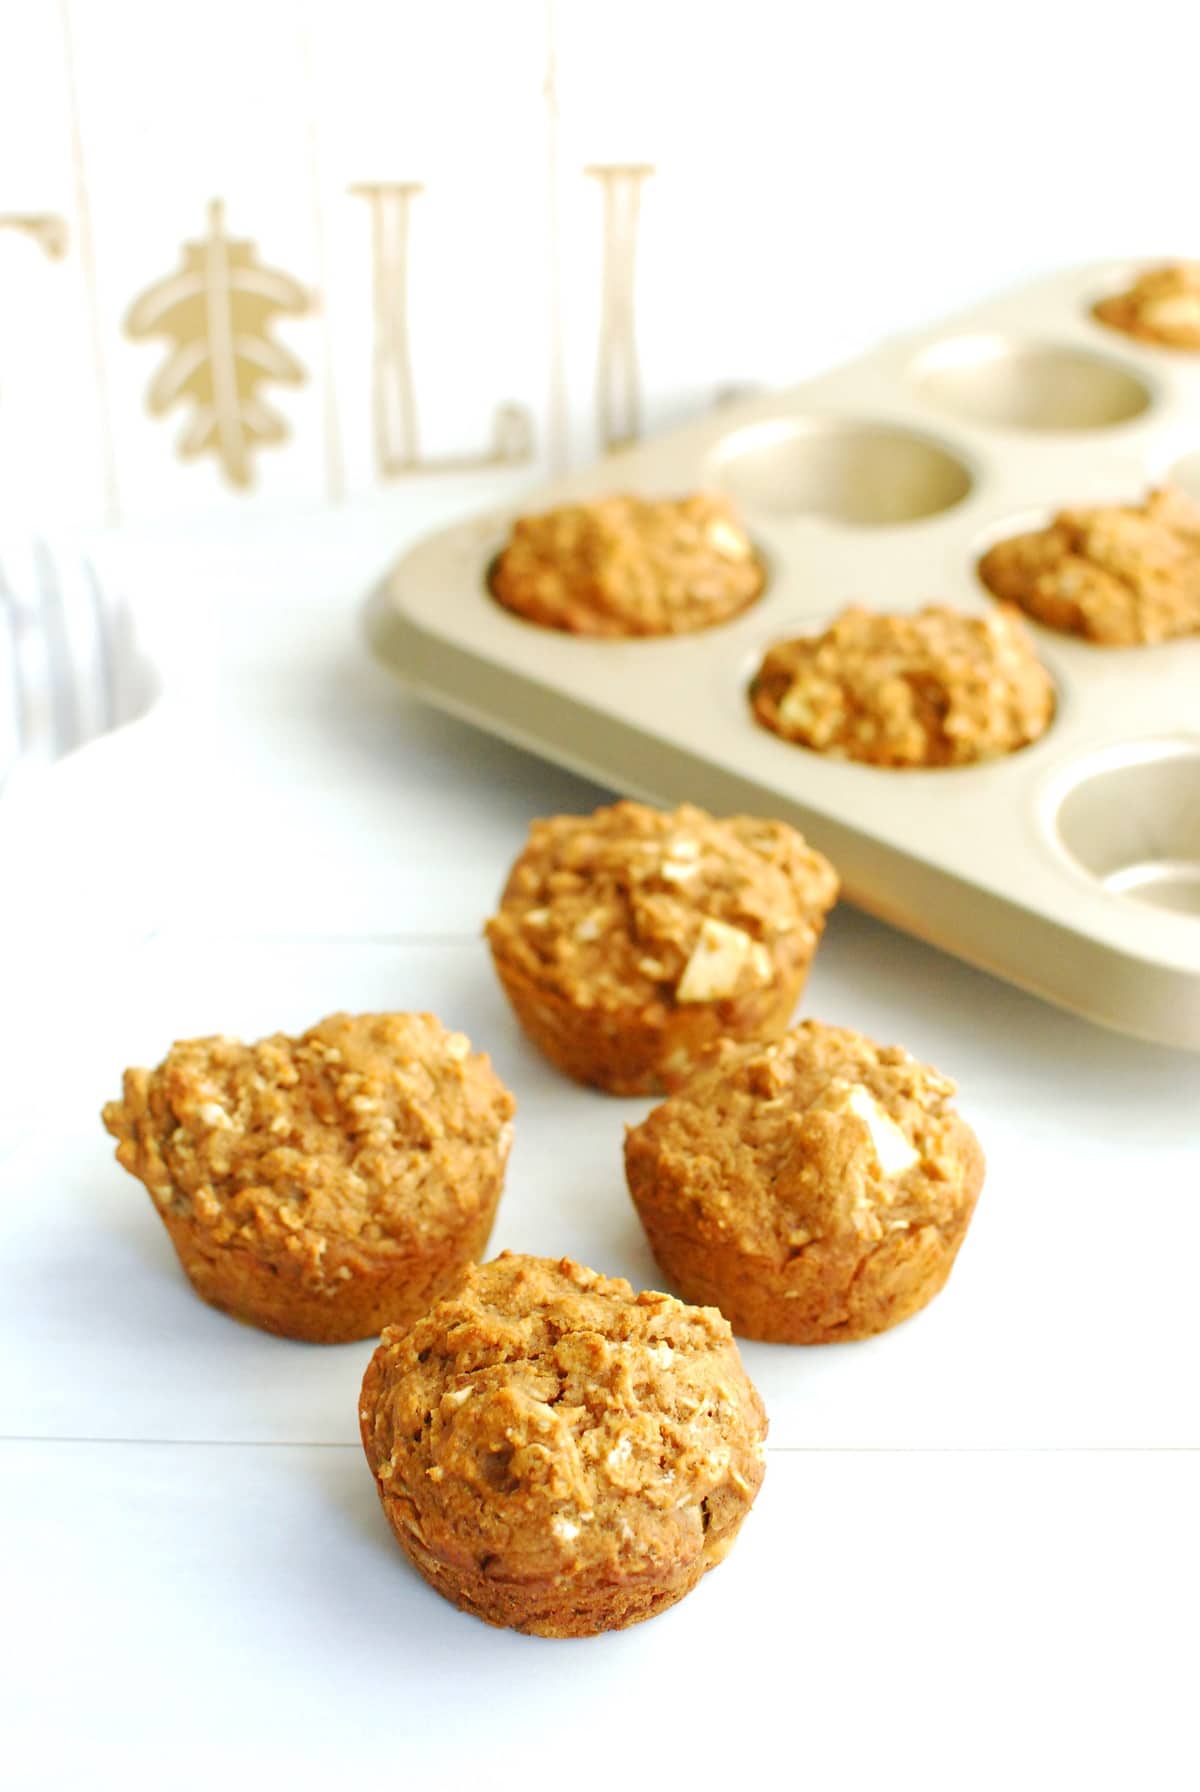 Several low sugar apple muffins on a table next to the baking tin and a fall sign.